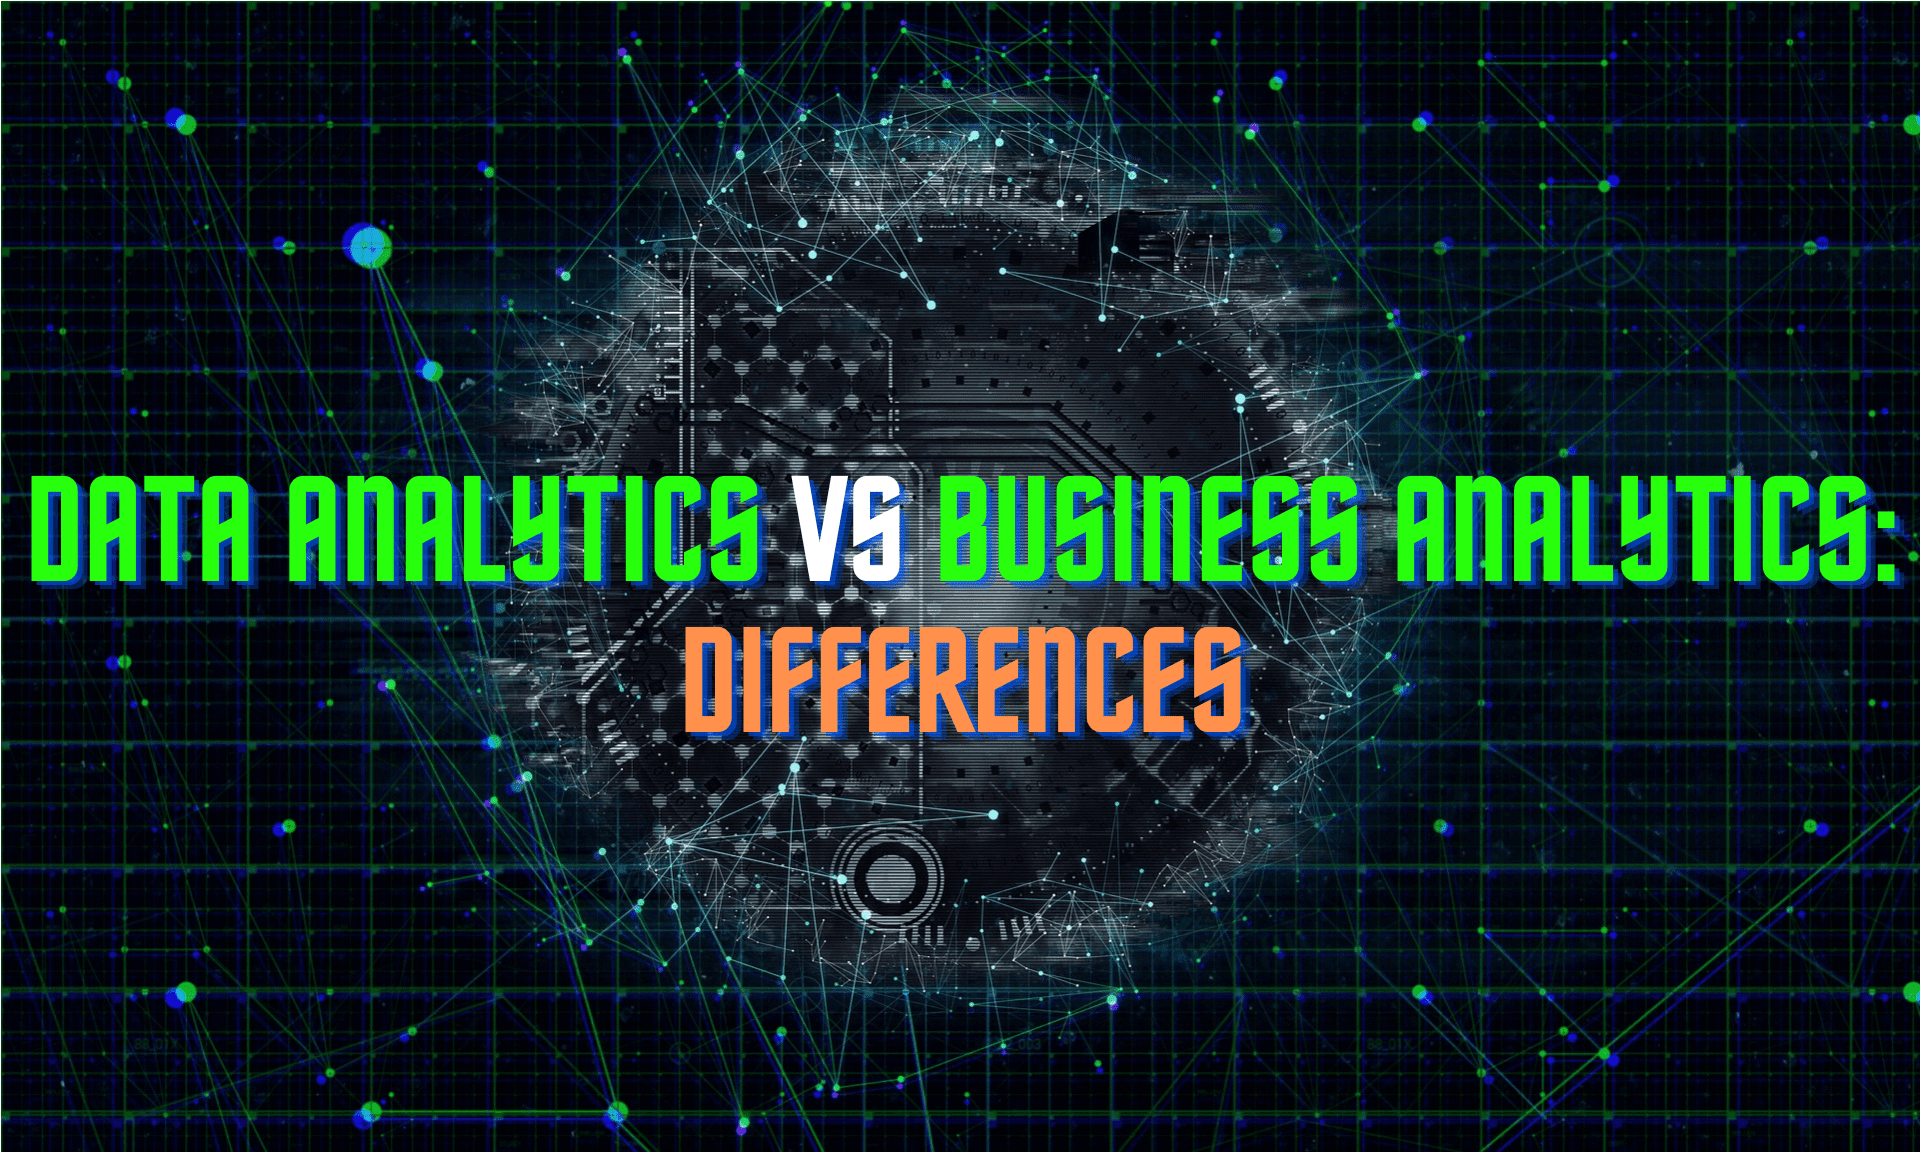 Learn the differences between Data analytics and Business Analytics